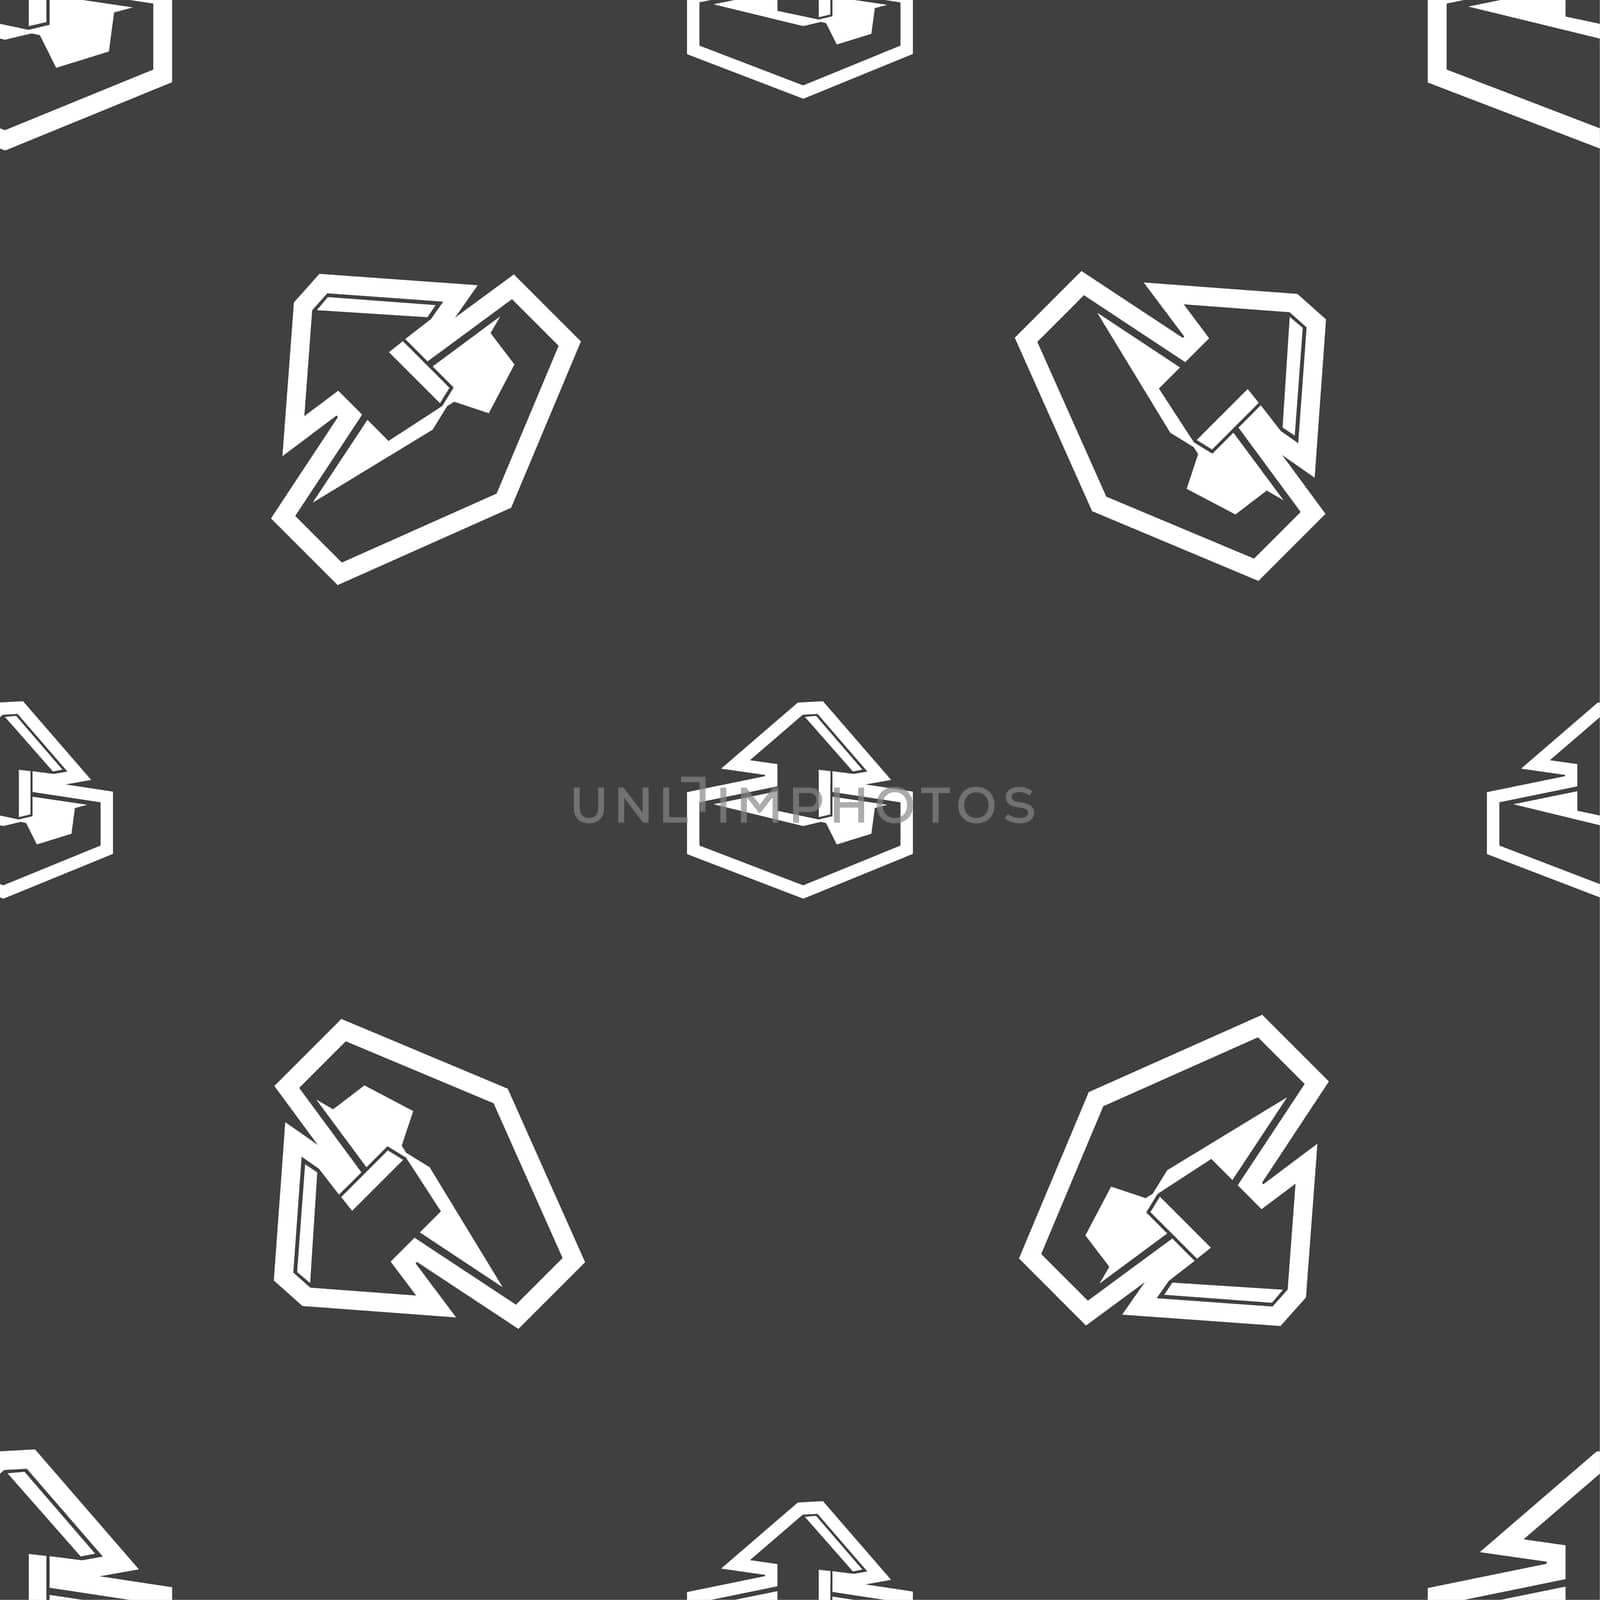 Upload icon sign. Seamless pattern on a gray background. illustration